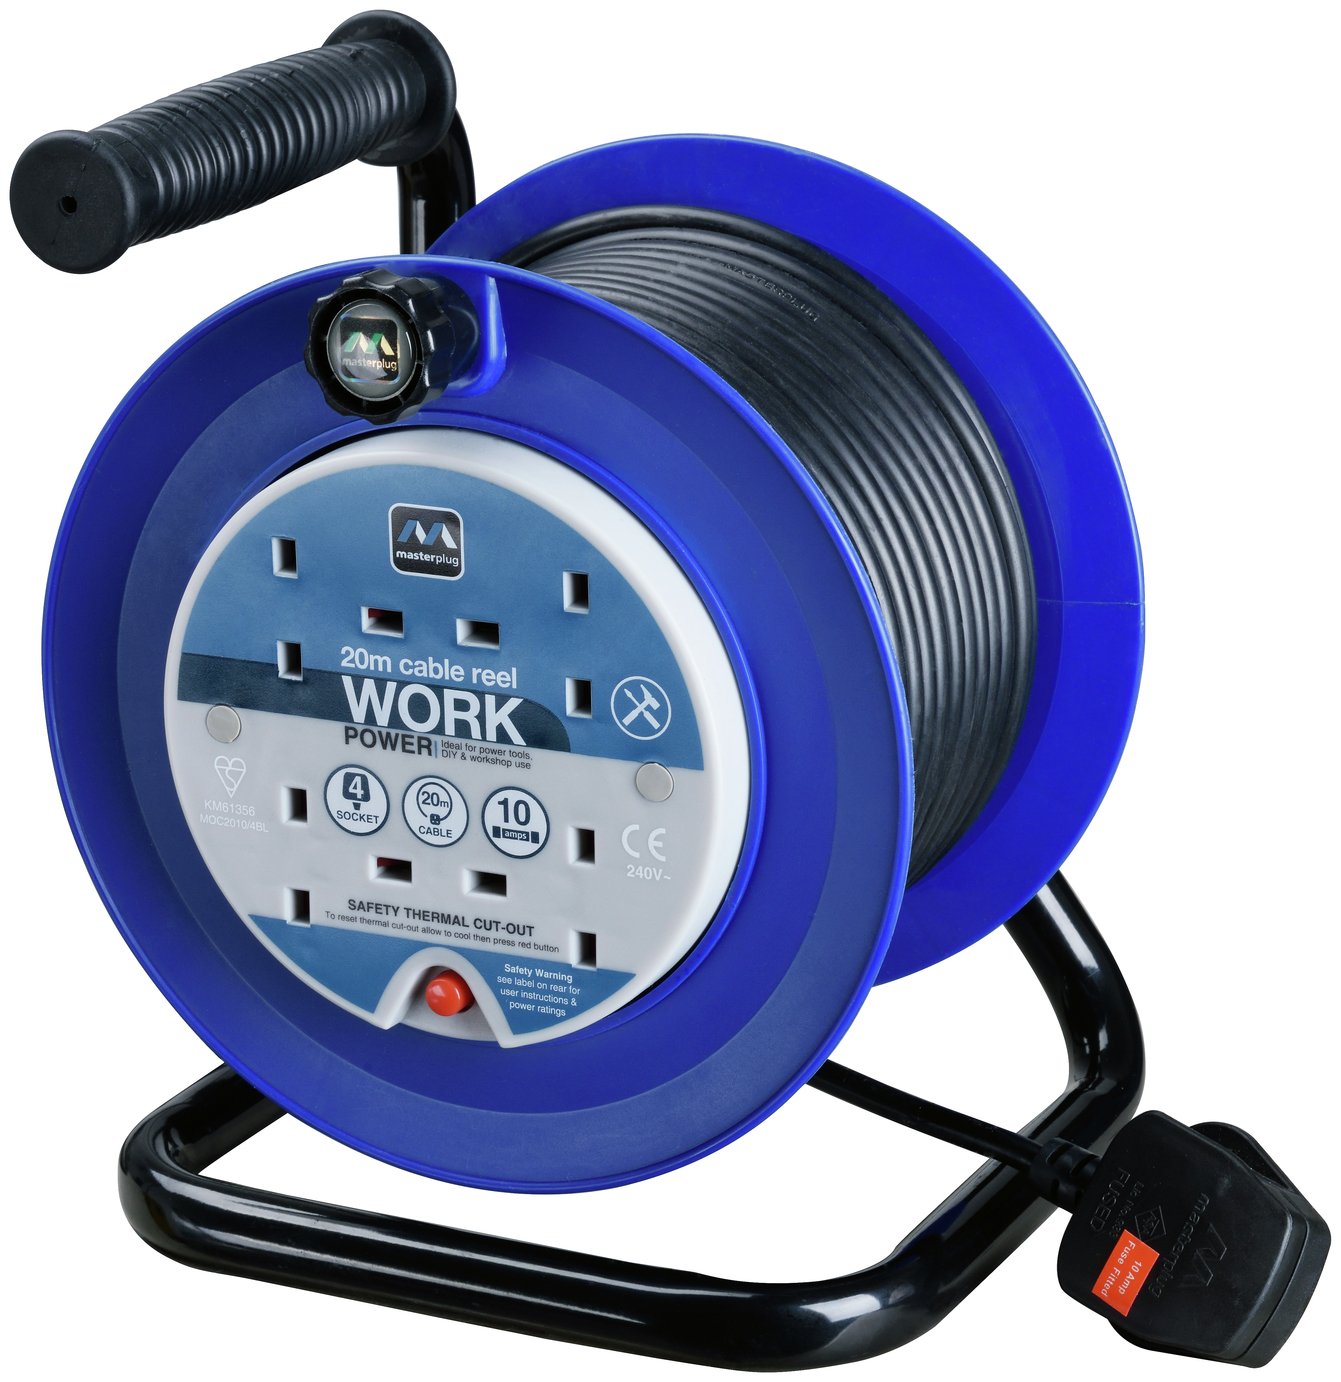 Masterplug 4 Socket Cable Reel Review